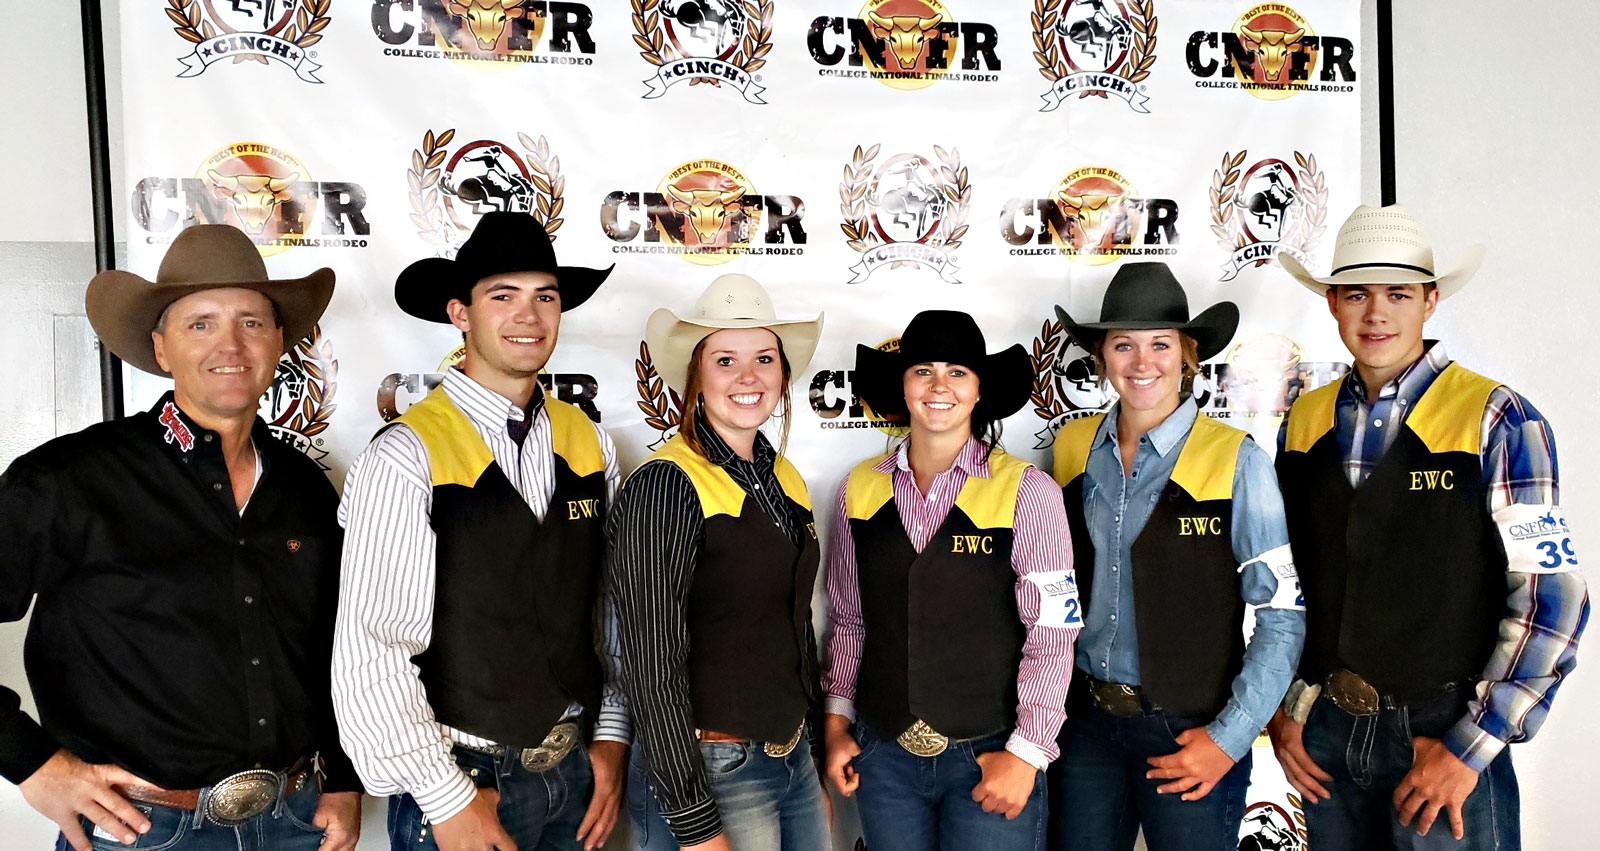 The Eastern Wyoming College Lancer rodeo students who qualified for the College National Finals Rodeo in Casper